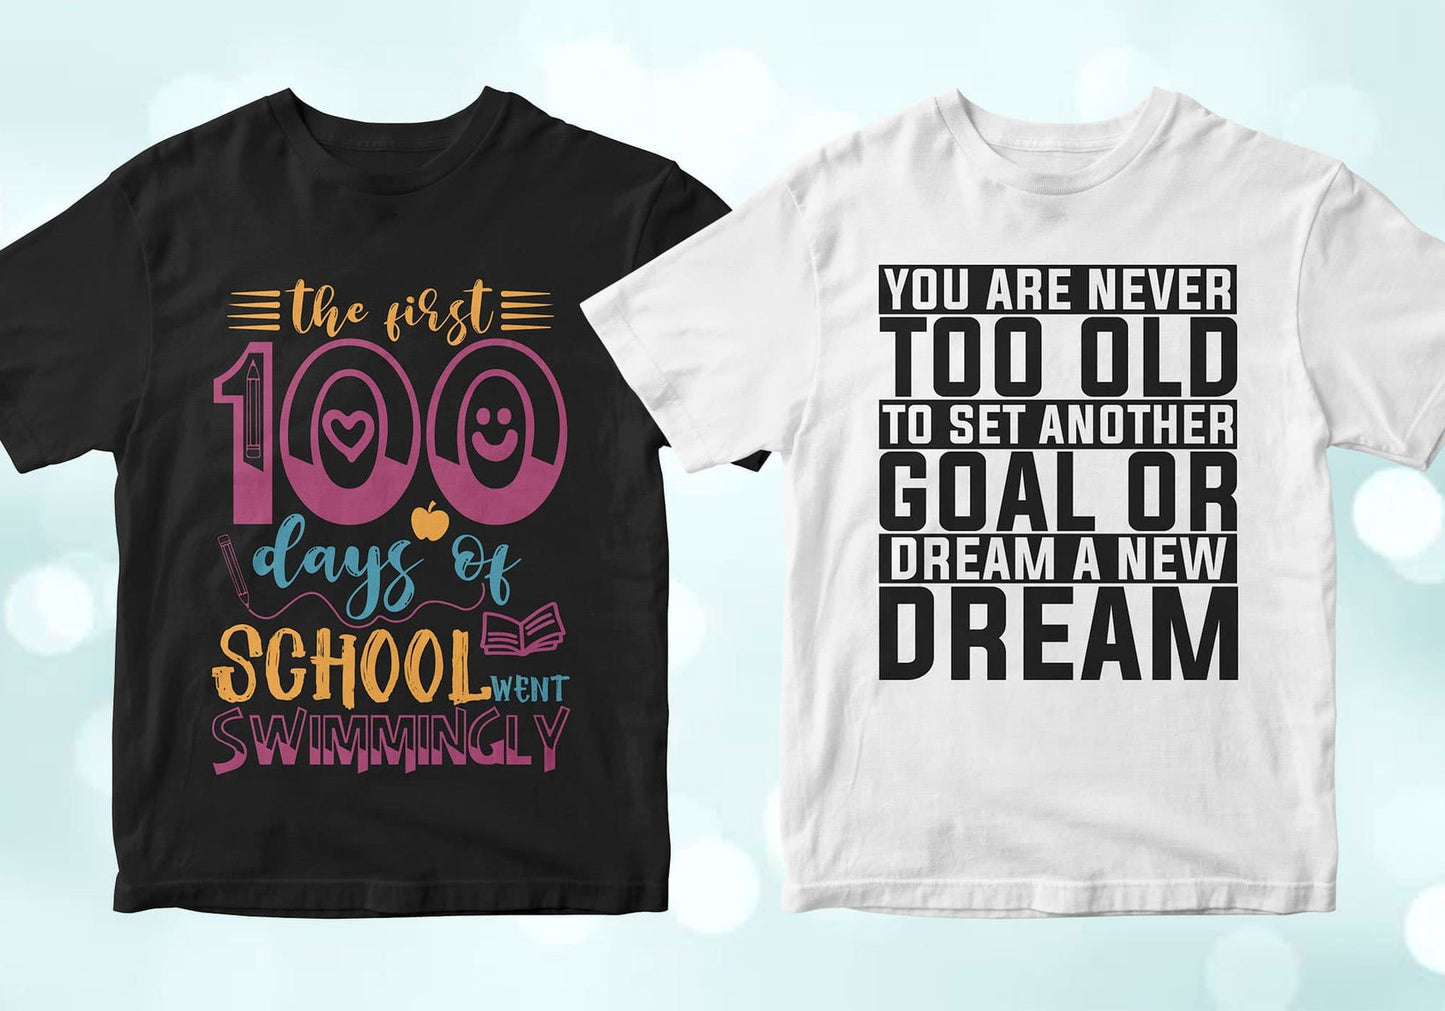 The first 100 days of school went swimmingly, You are never too old to set another goal or dream a new dream